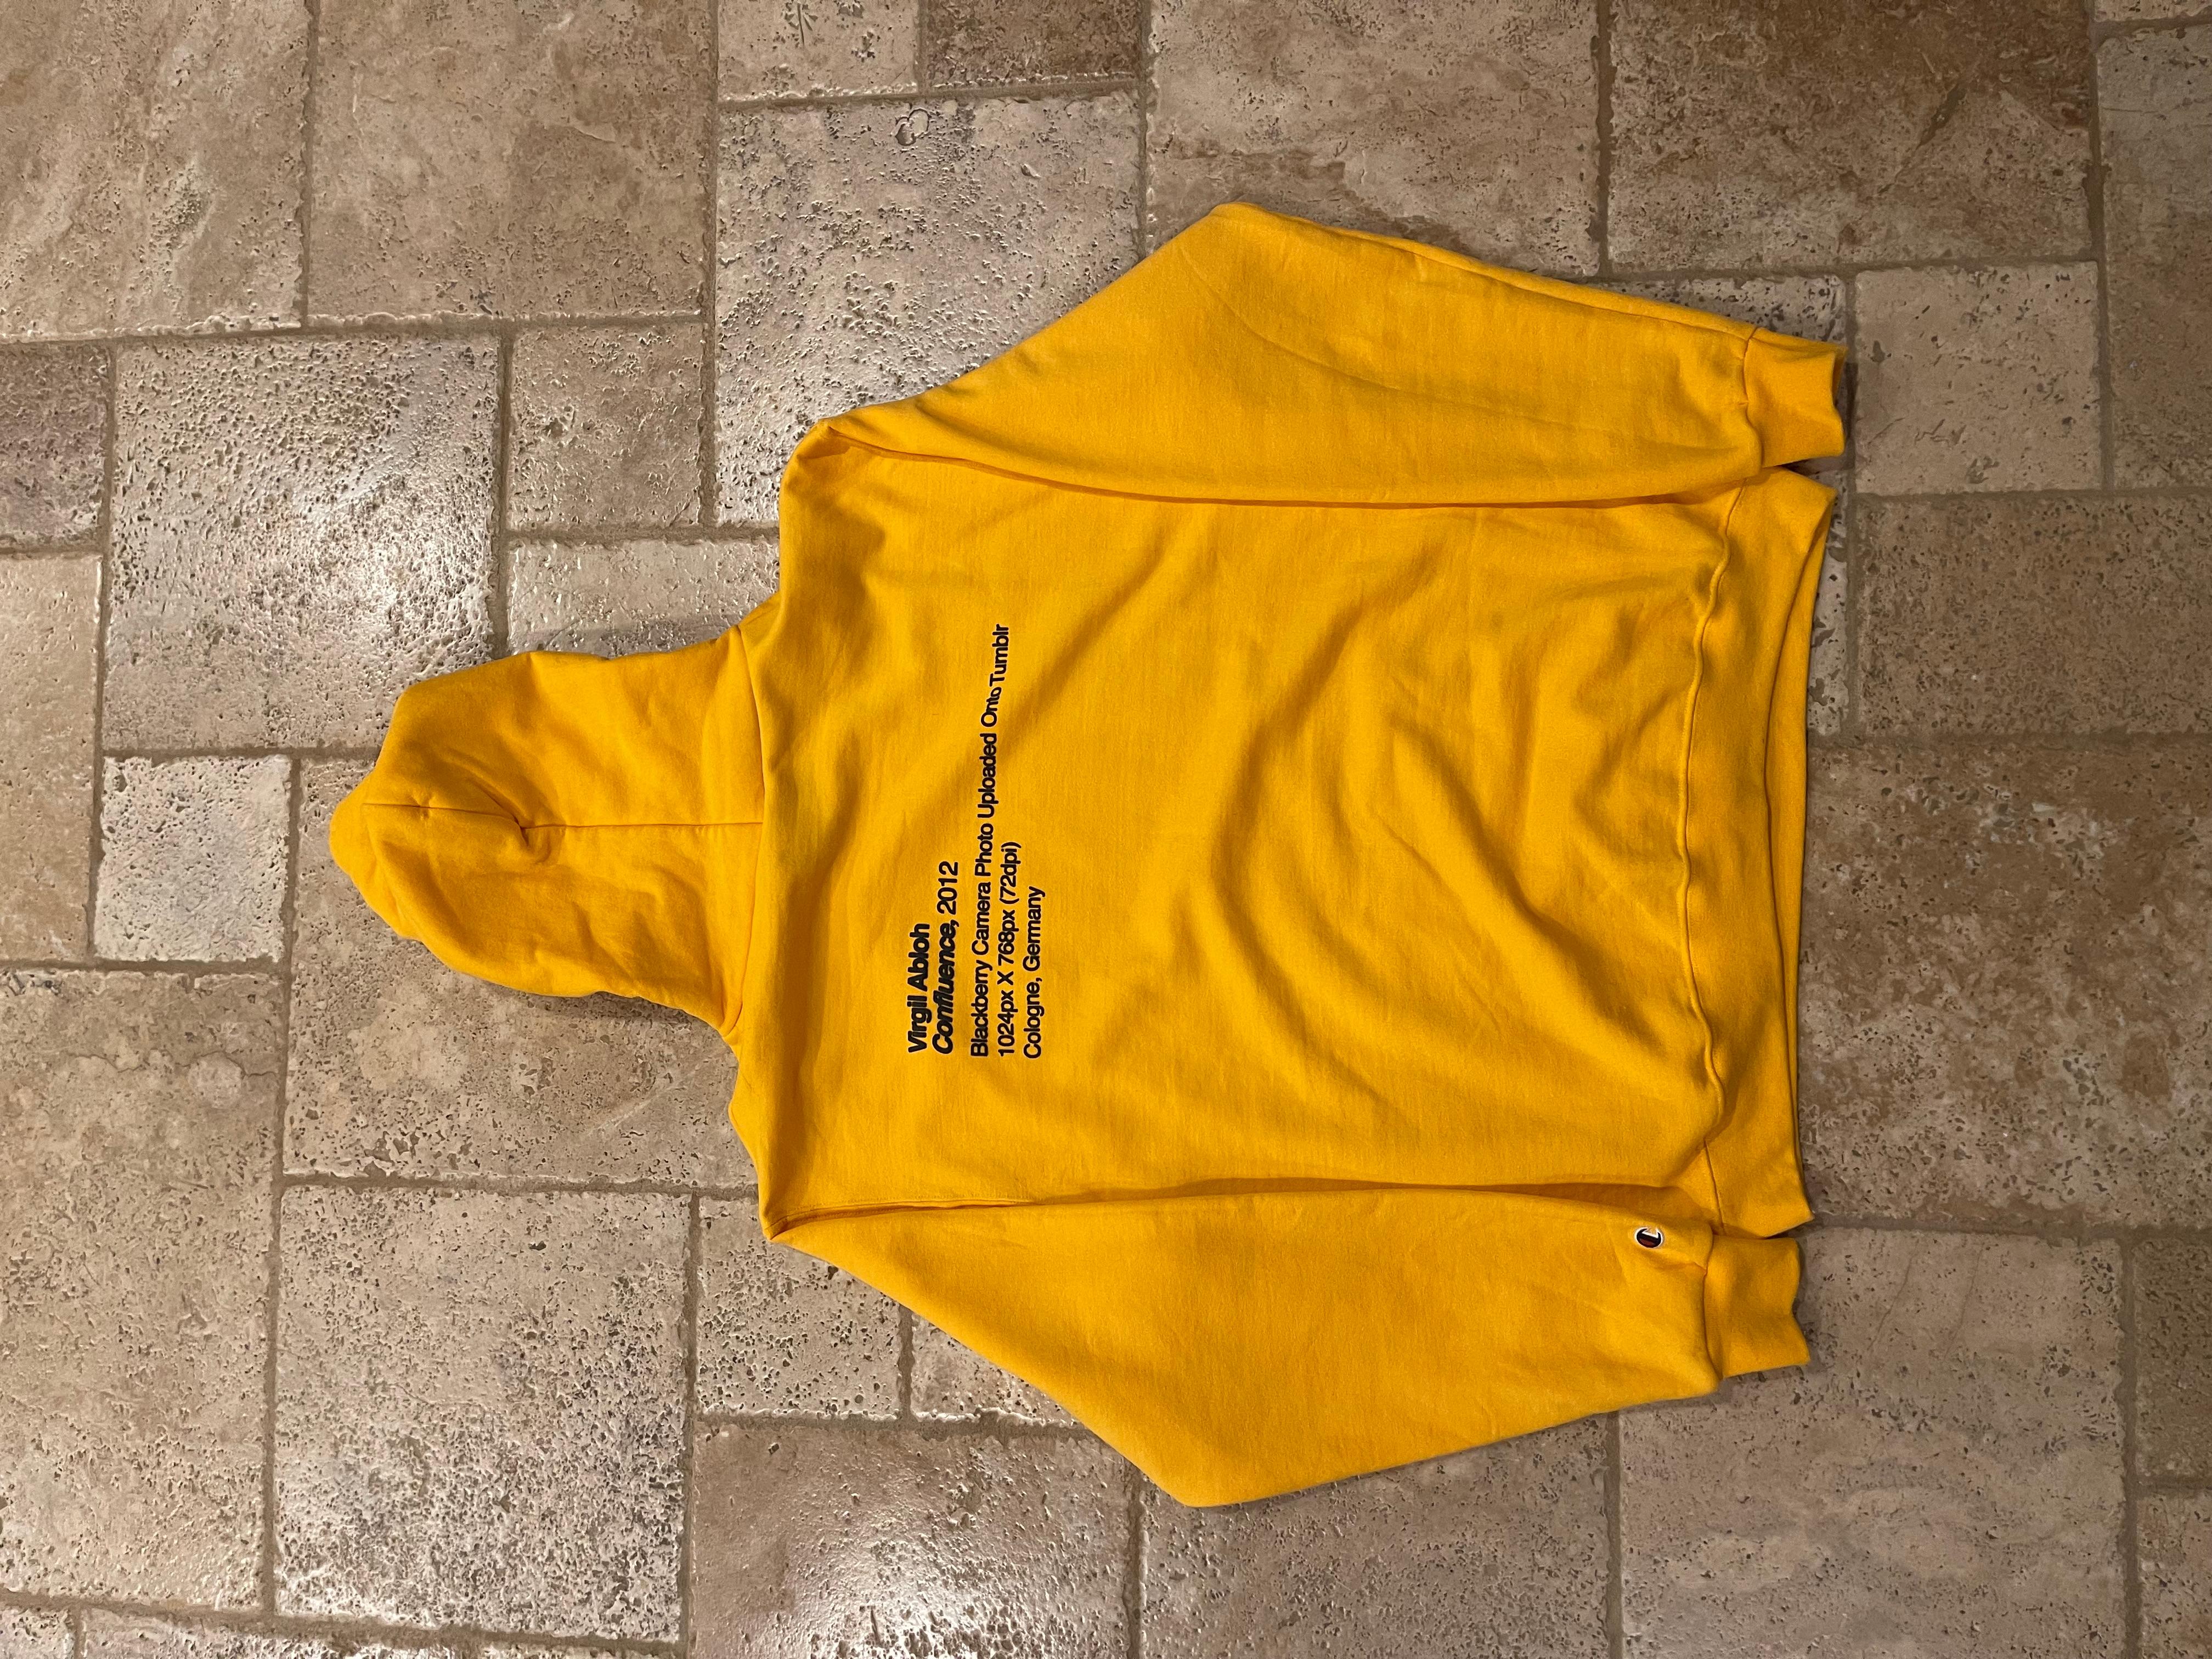 Virgil x MCA Figures of Speech Pyrex Vision Yellow Hoodie

Size Large
Great overall used condition (view all pics)
A personal hoodie of mine. No rush to sell.
Extremely rare.

Measurements:

Chest: 23”
Length: 28.5”
Shoulders: 22”
Sleeve length: